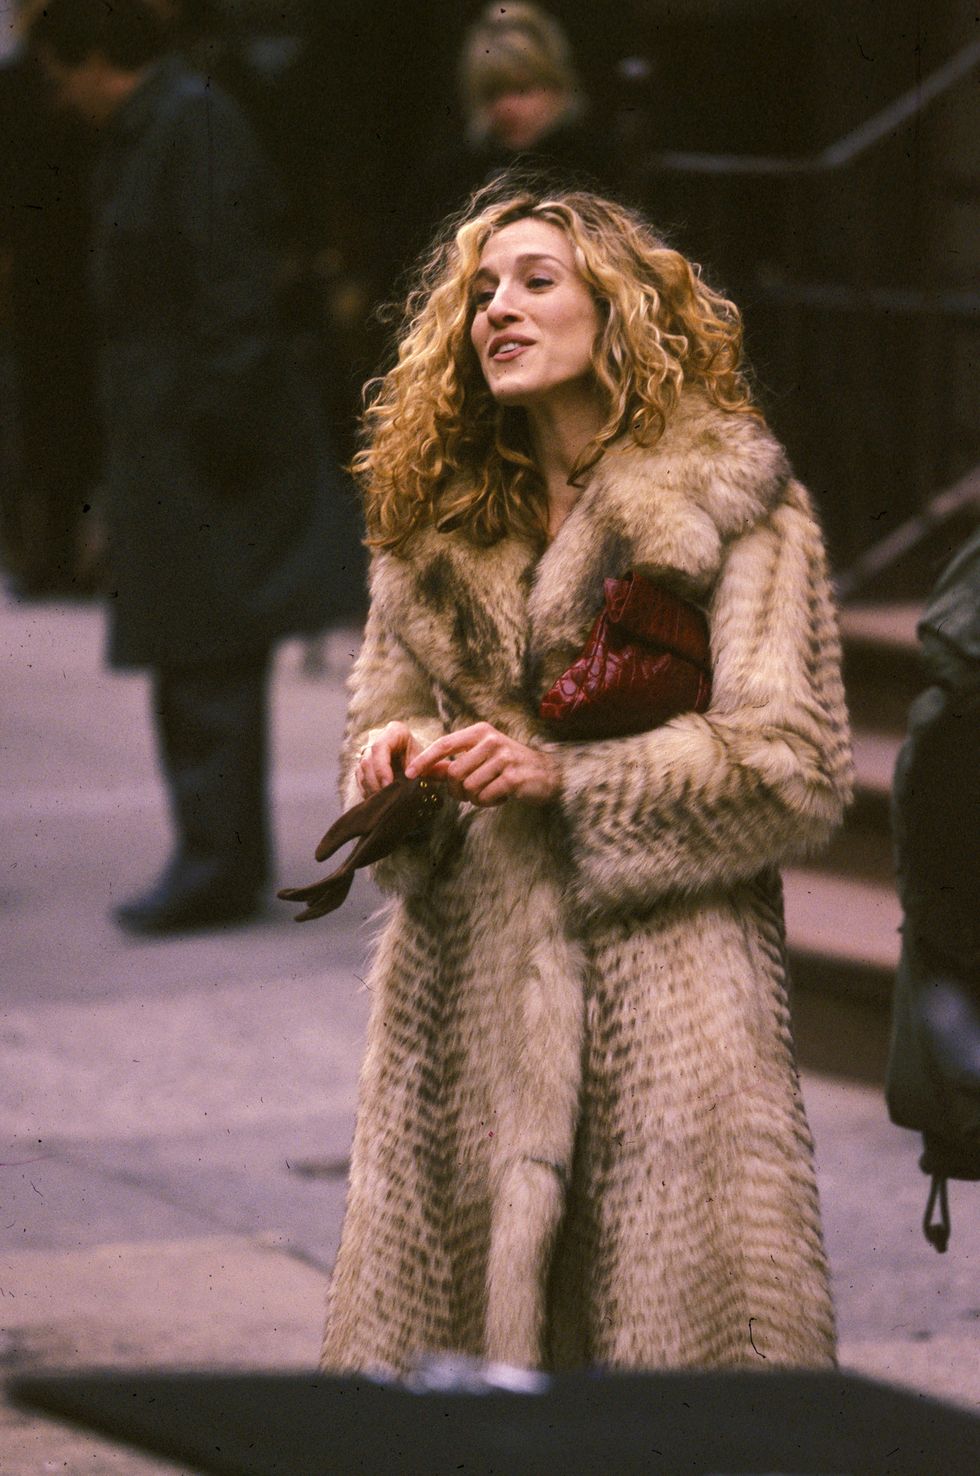 sarah jessica parker during filming movie sex in the city at madison avenue in new york city, new york, united states photo by ron galella, ltdron galella collection via getty images